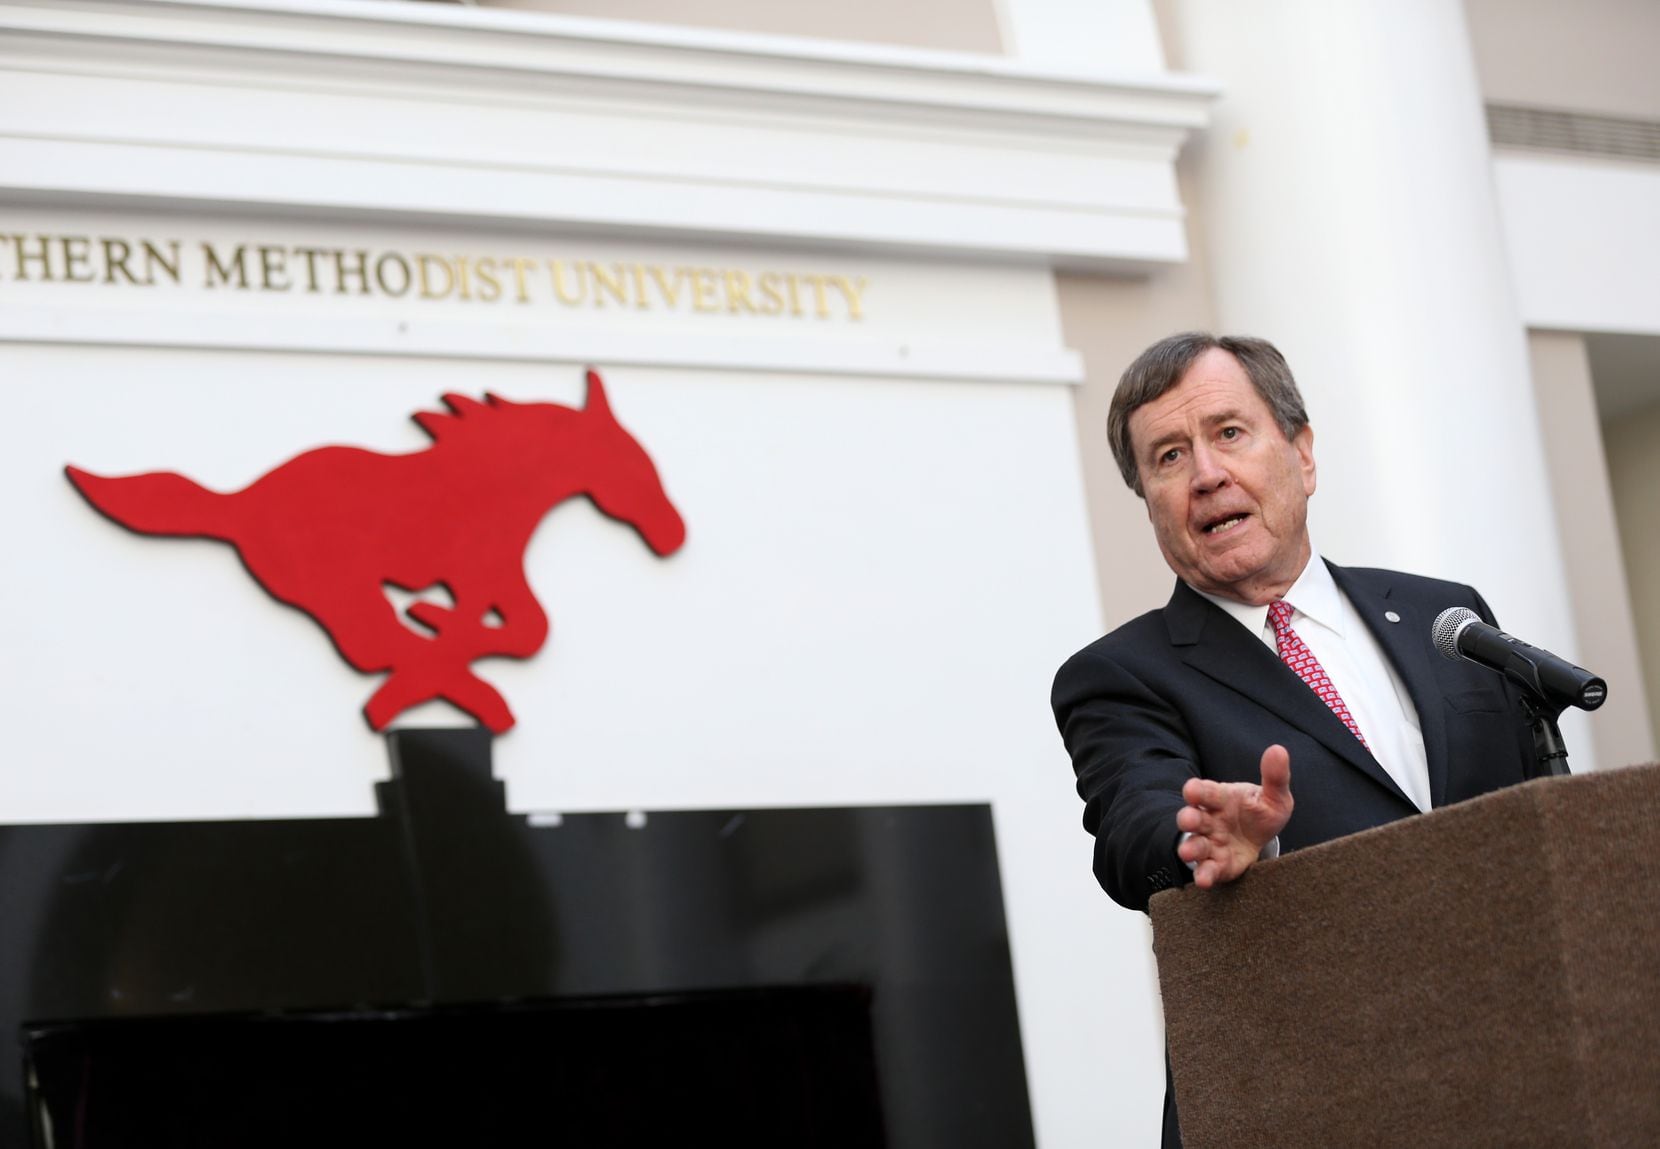 SMU president R. Gerald Turner said the university's actions to assert its independence were caused by what is believed to be a looming split in the church over LGBTQ rights.